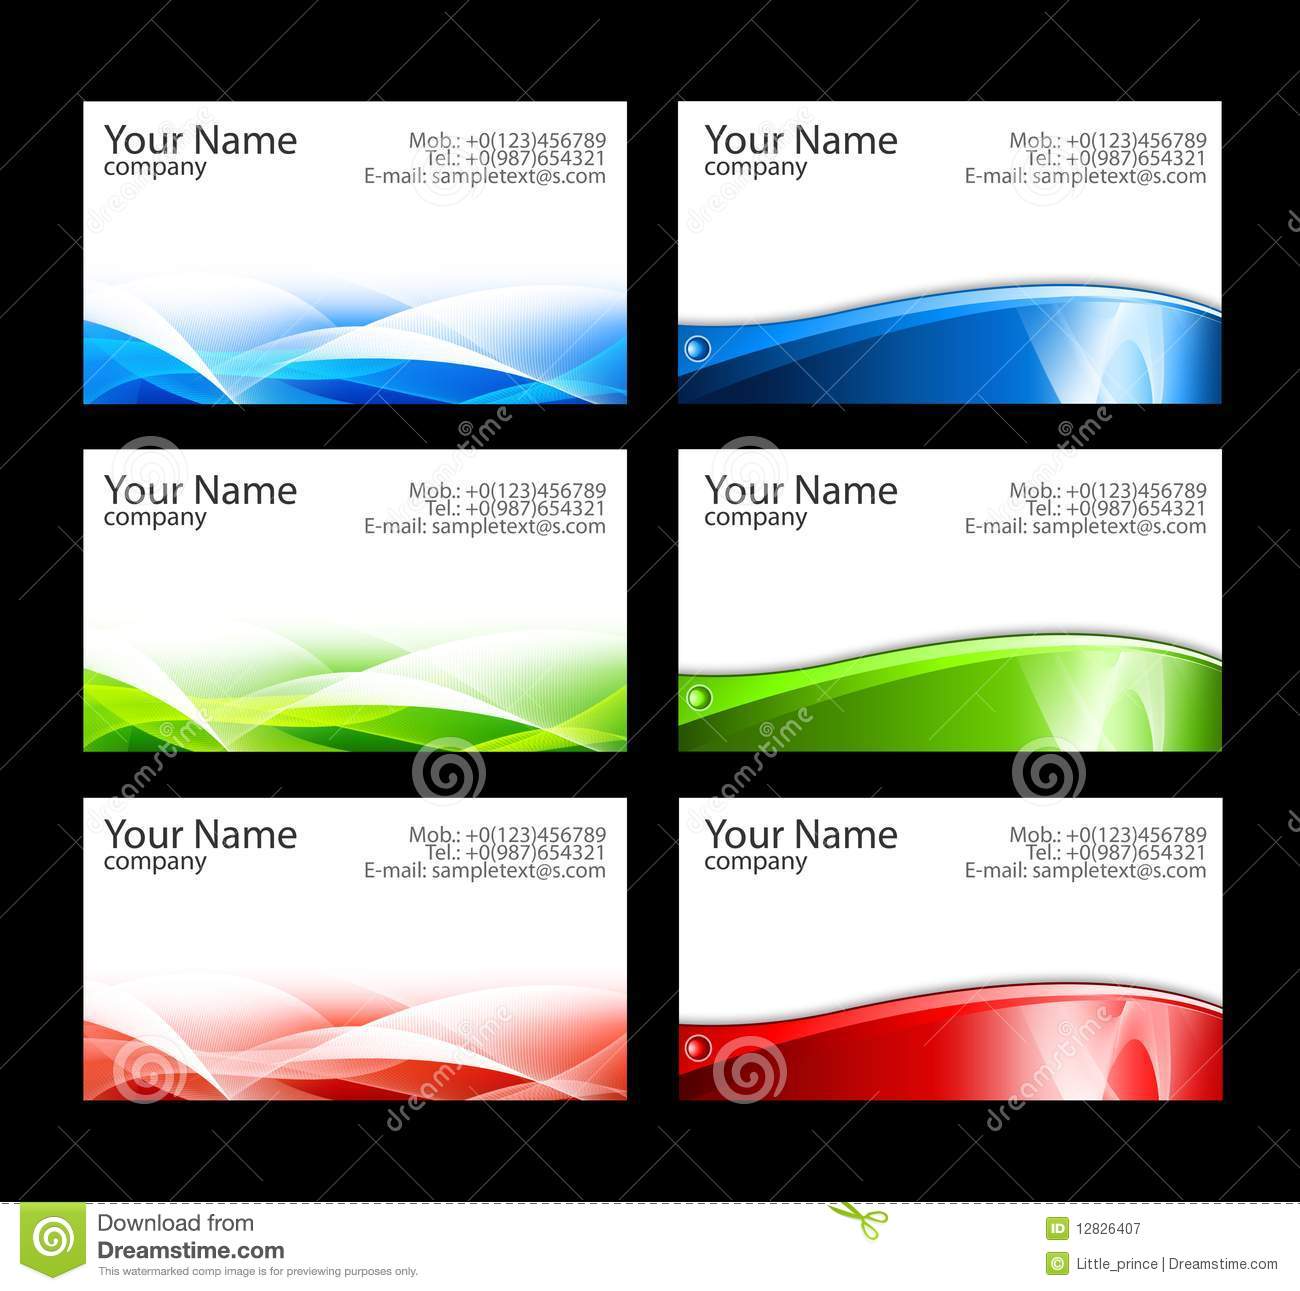 21 Business Card Templates Images - Free Business Card Template With Regard To Business Card Template Word 2010